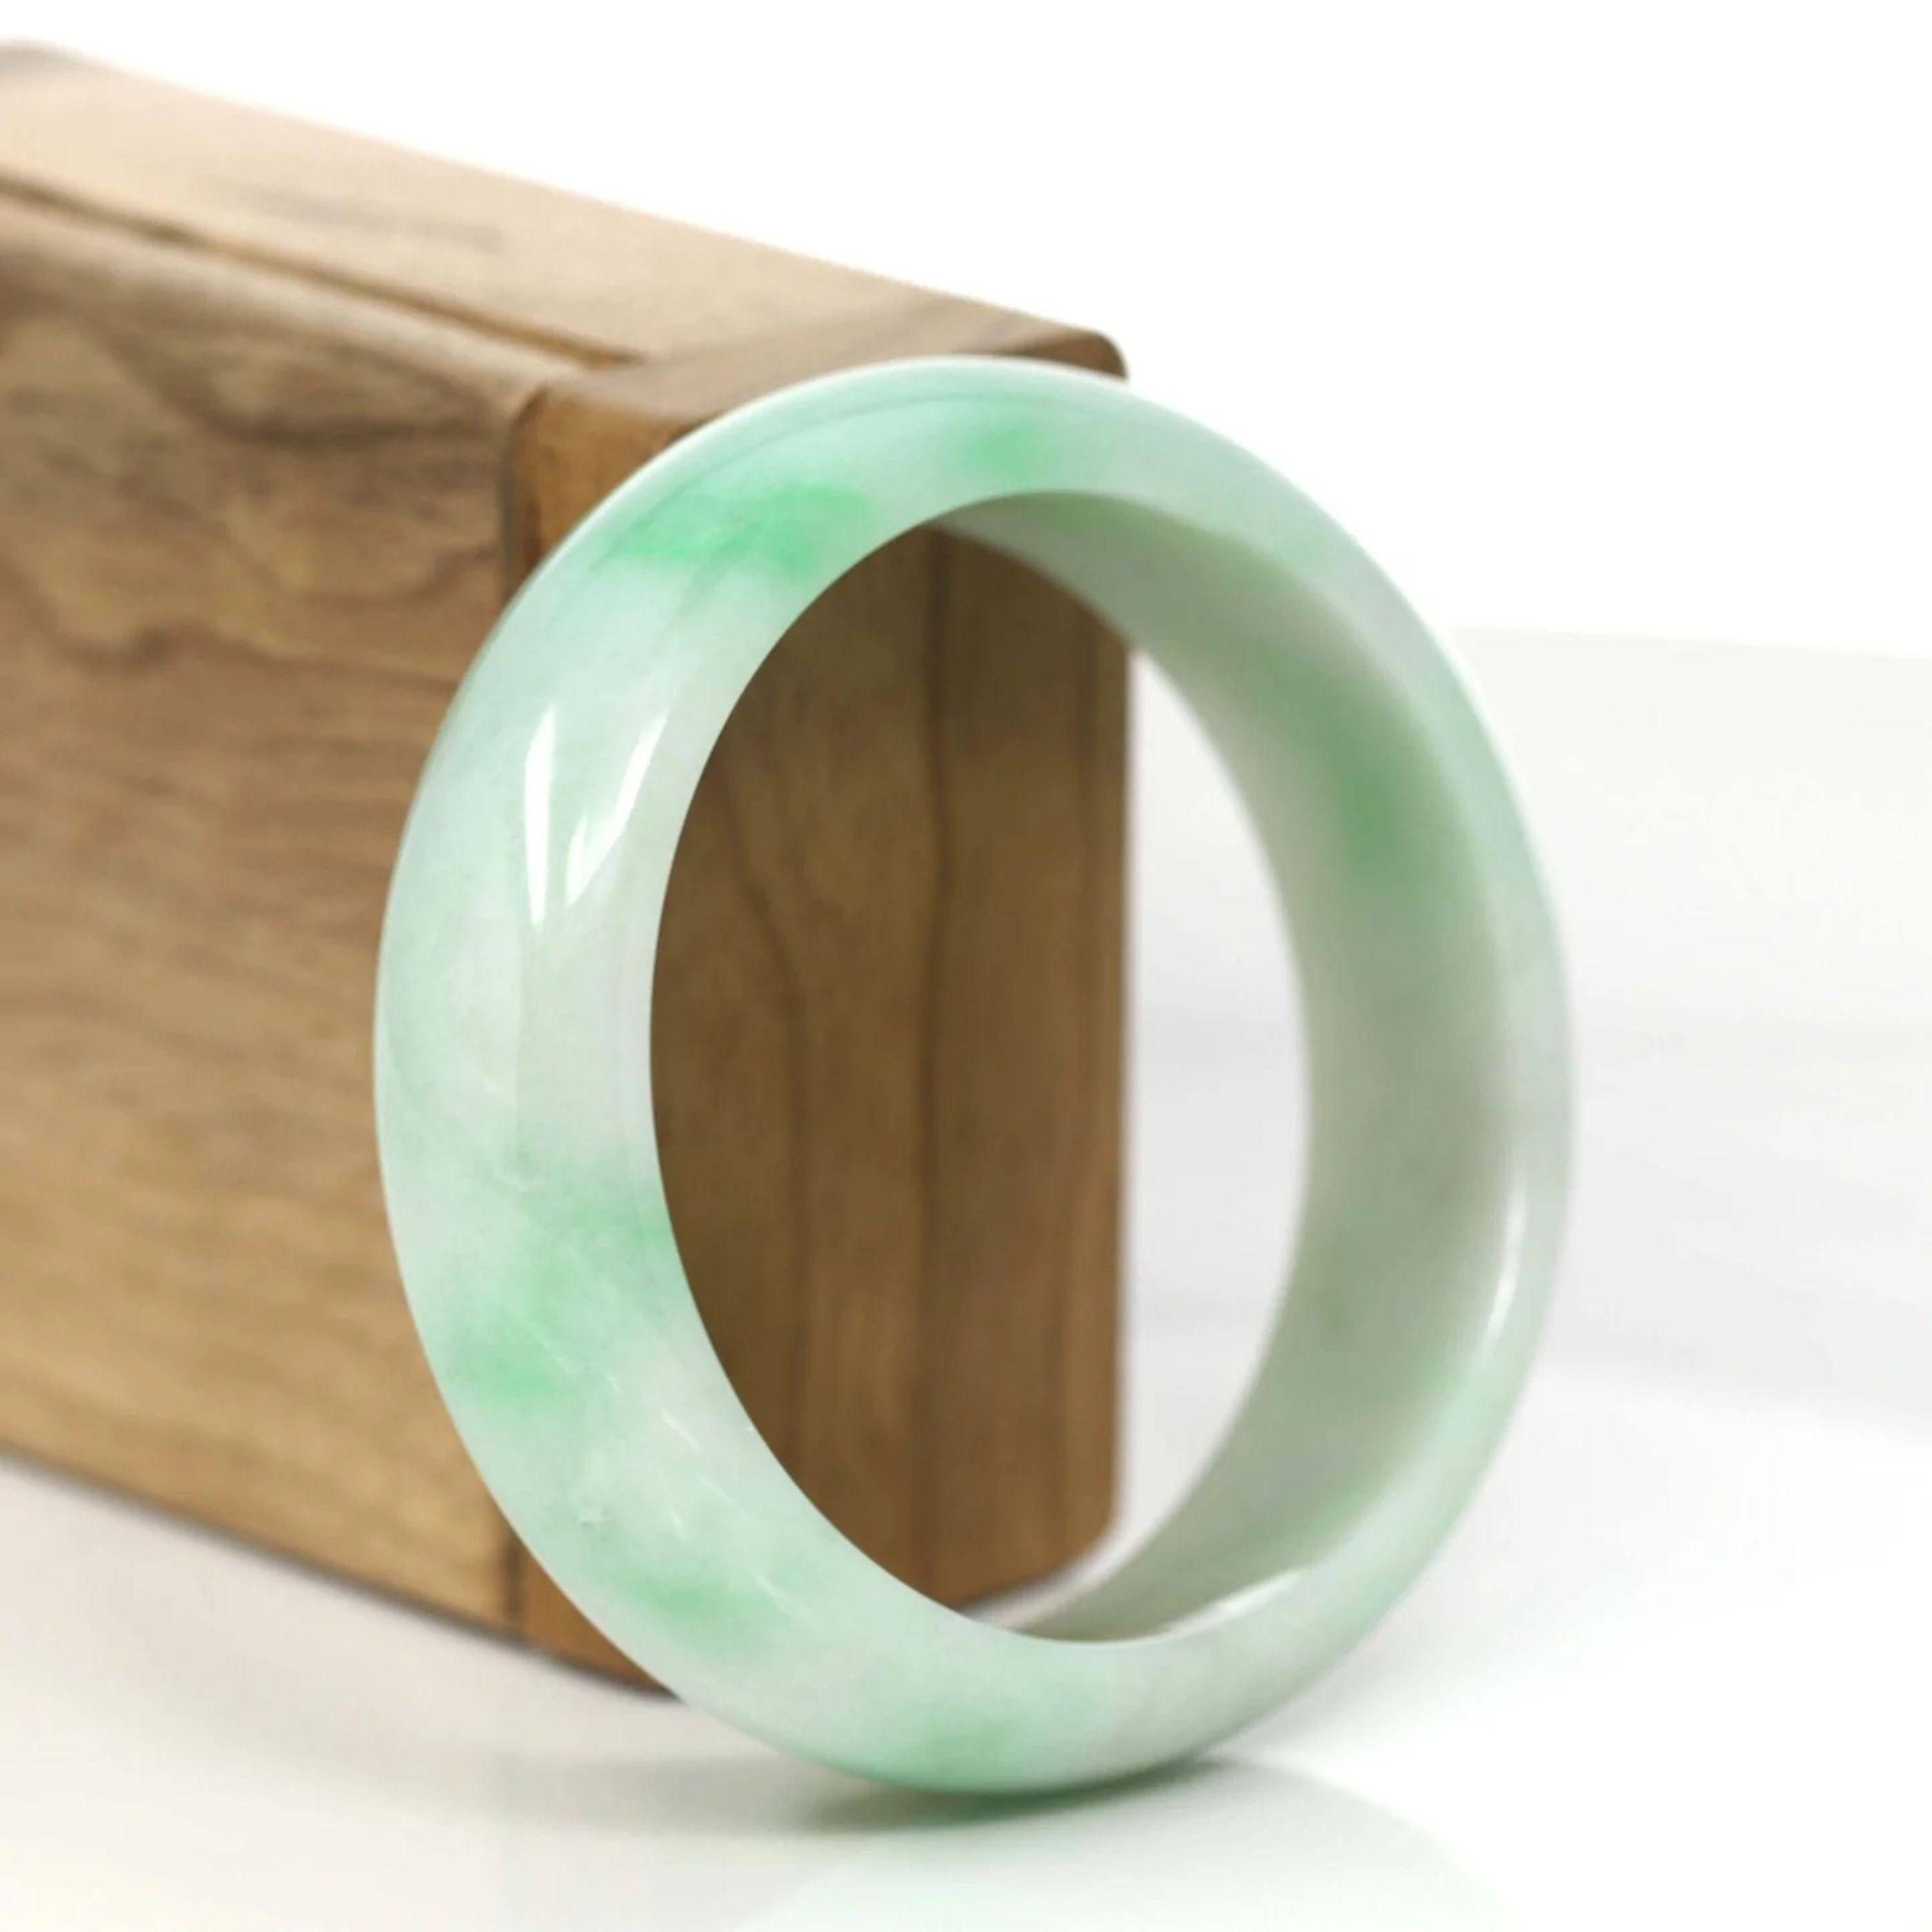 * DETAILS---This bangle is made with very high quality genuine apple green Burmese jadeite jade. The jade texture is very smooth and translucent with apple green patch all over, It is a very luxury and perfect bangle. Characterized by its wider